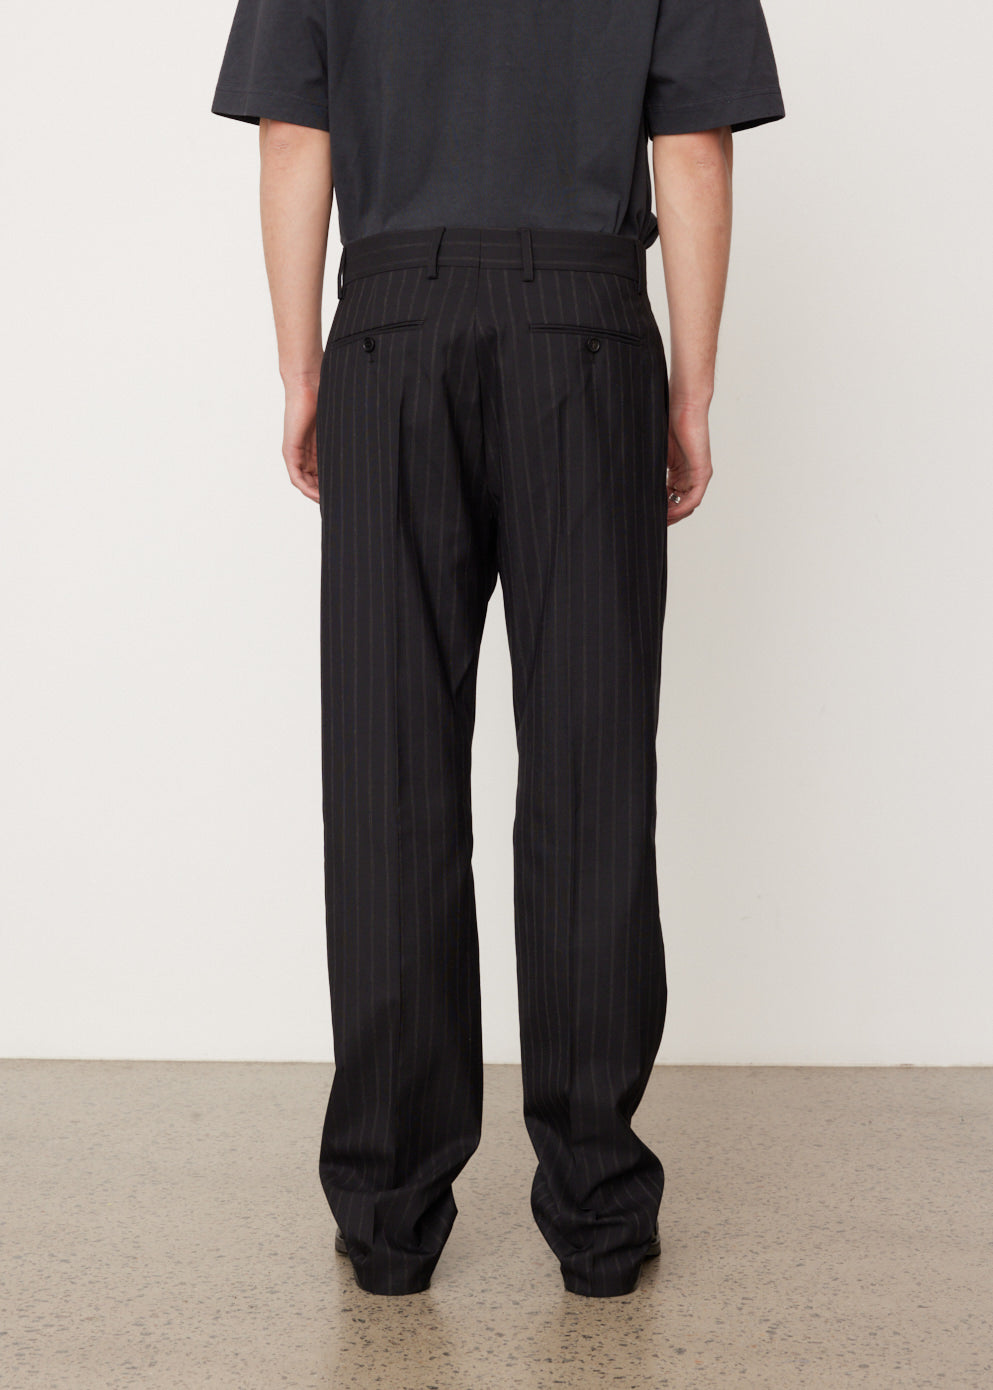 Philly Pinstripe Suit Trousers